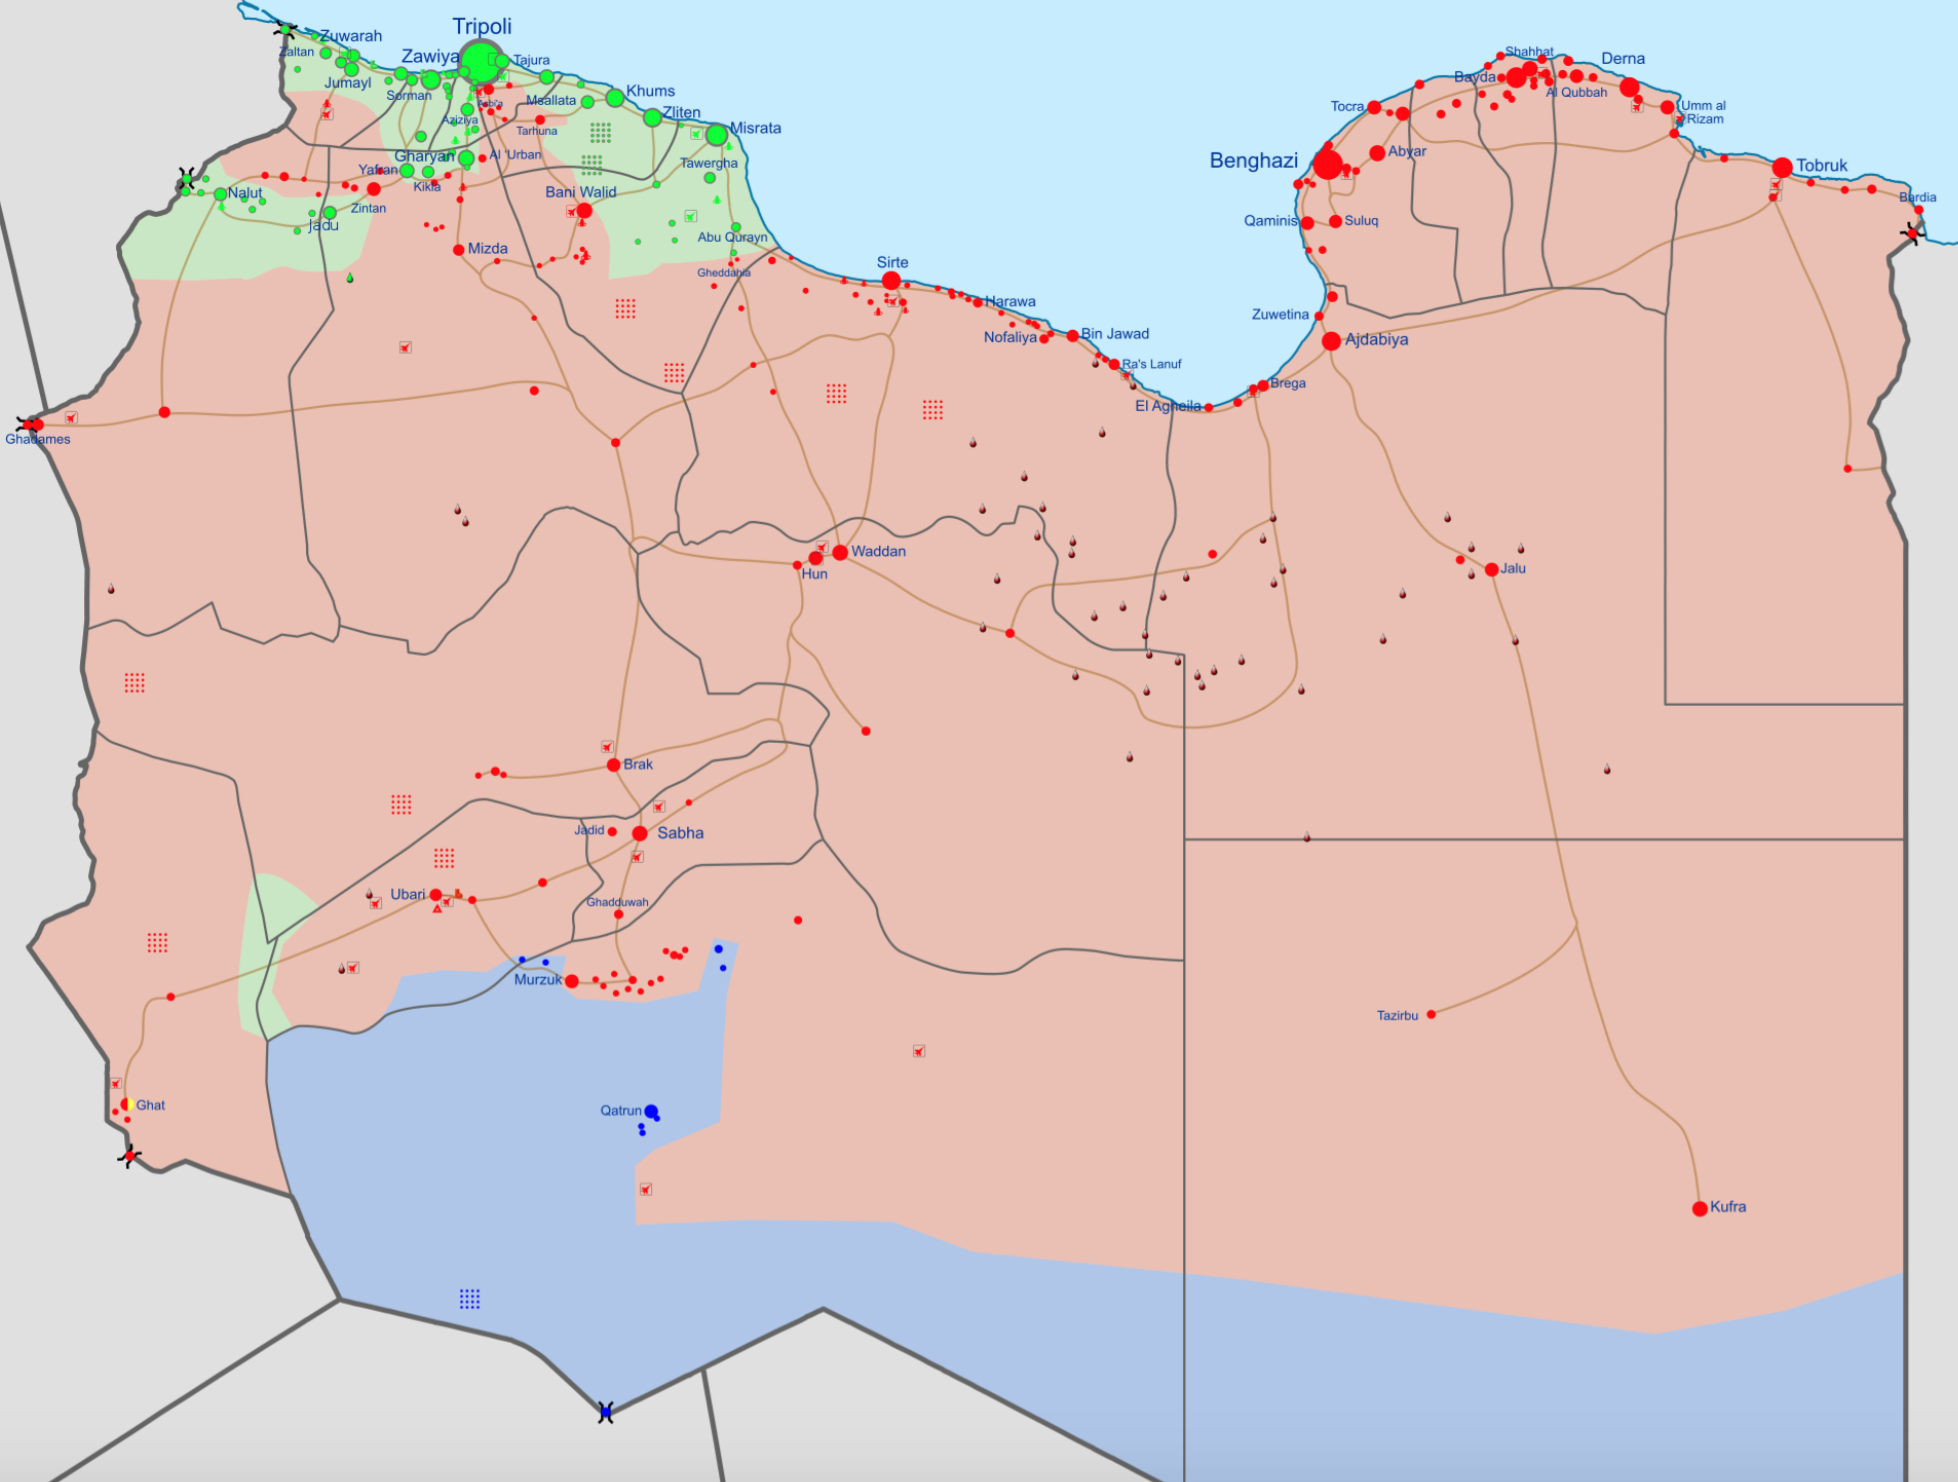 Correlation of forces in the Libyan civil war, February 2016 [Wikipedia].